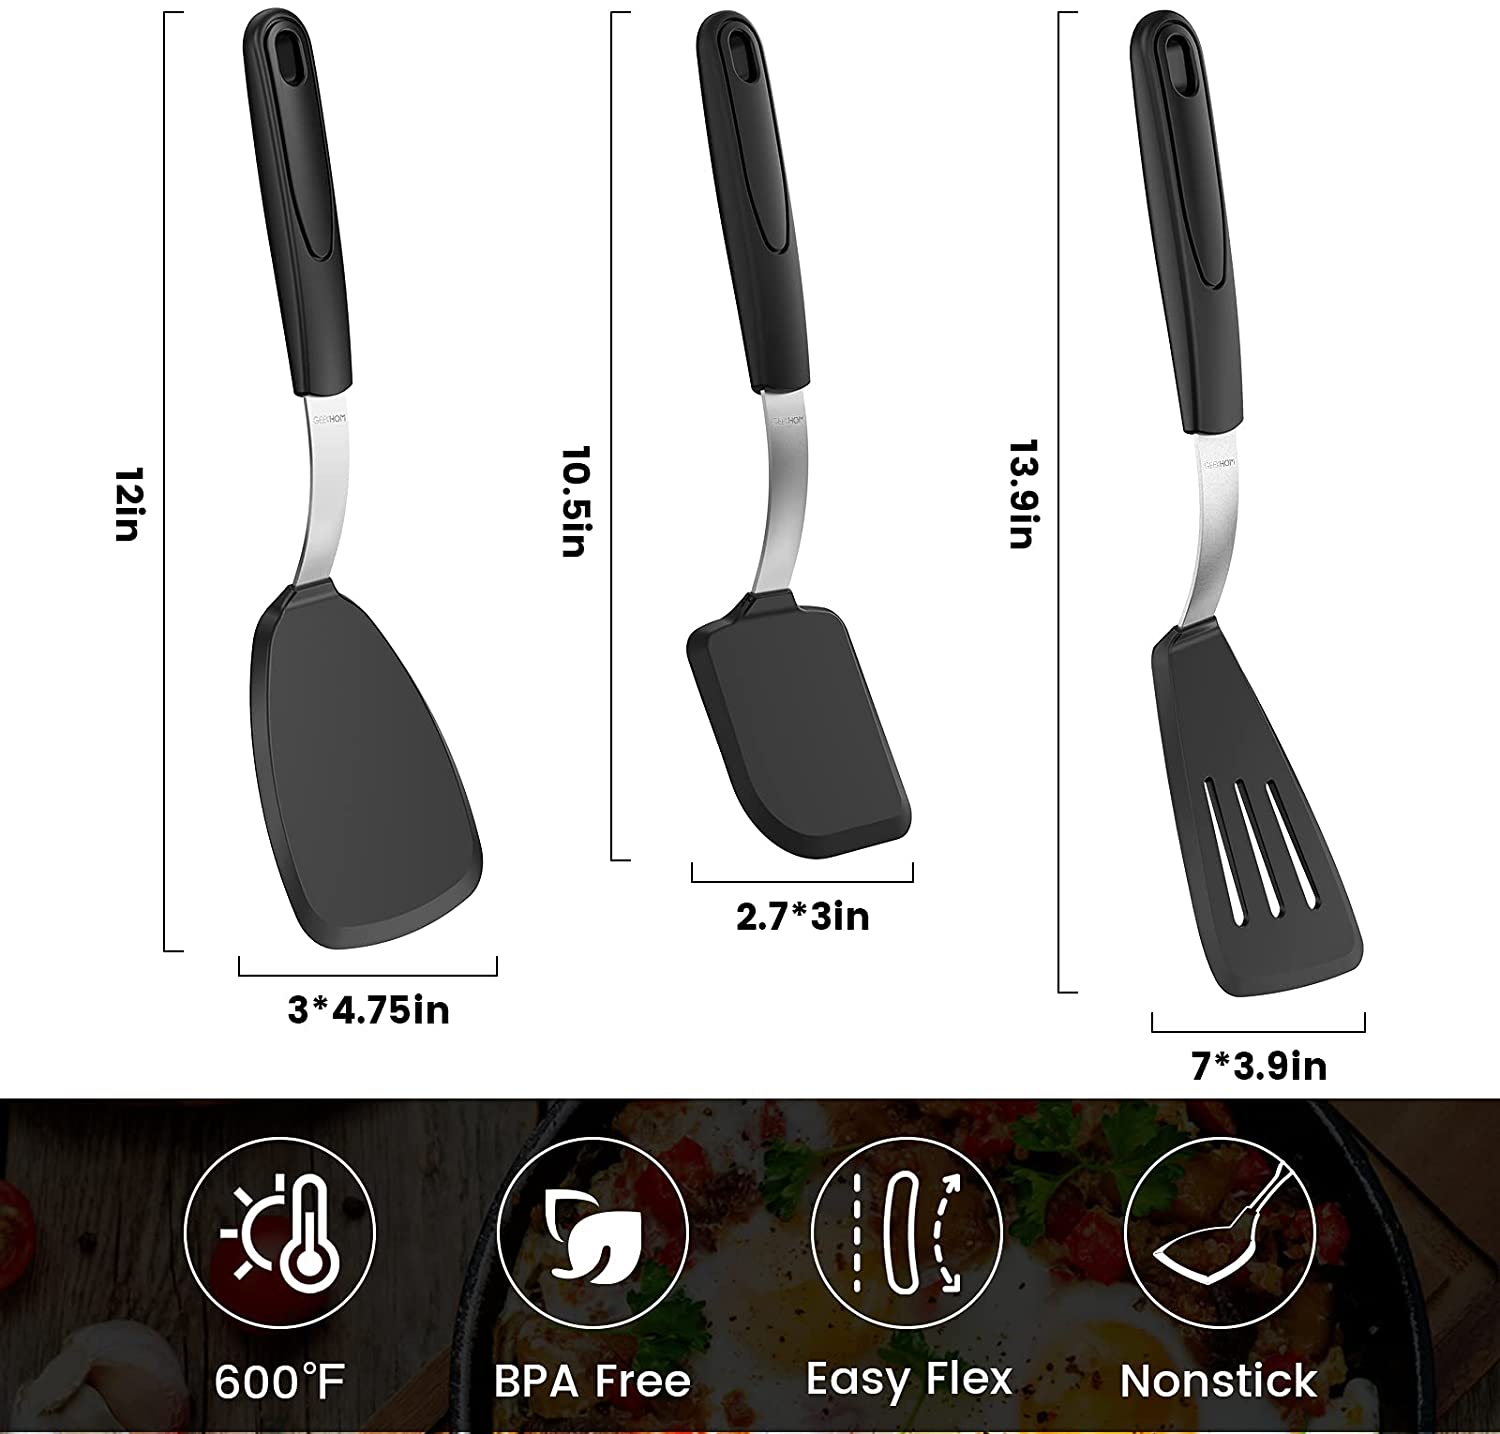 GEEKHOM Silicone Spatula Turner 2 Pack for Nonstick Cookware,600°F Heat  Resistant Flexible Kitchen S…See more GEEKHOM Silicone Spatula Turner 2  Pack